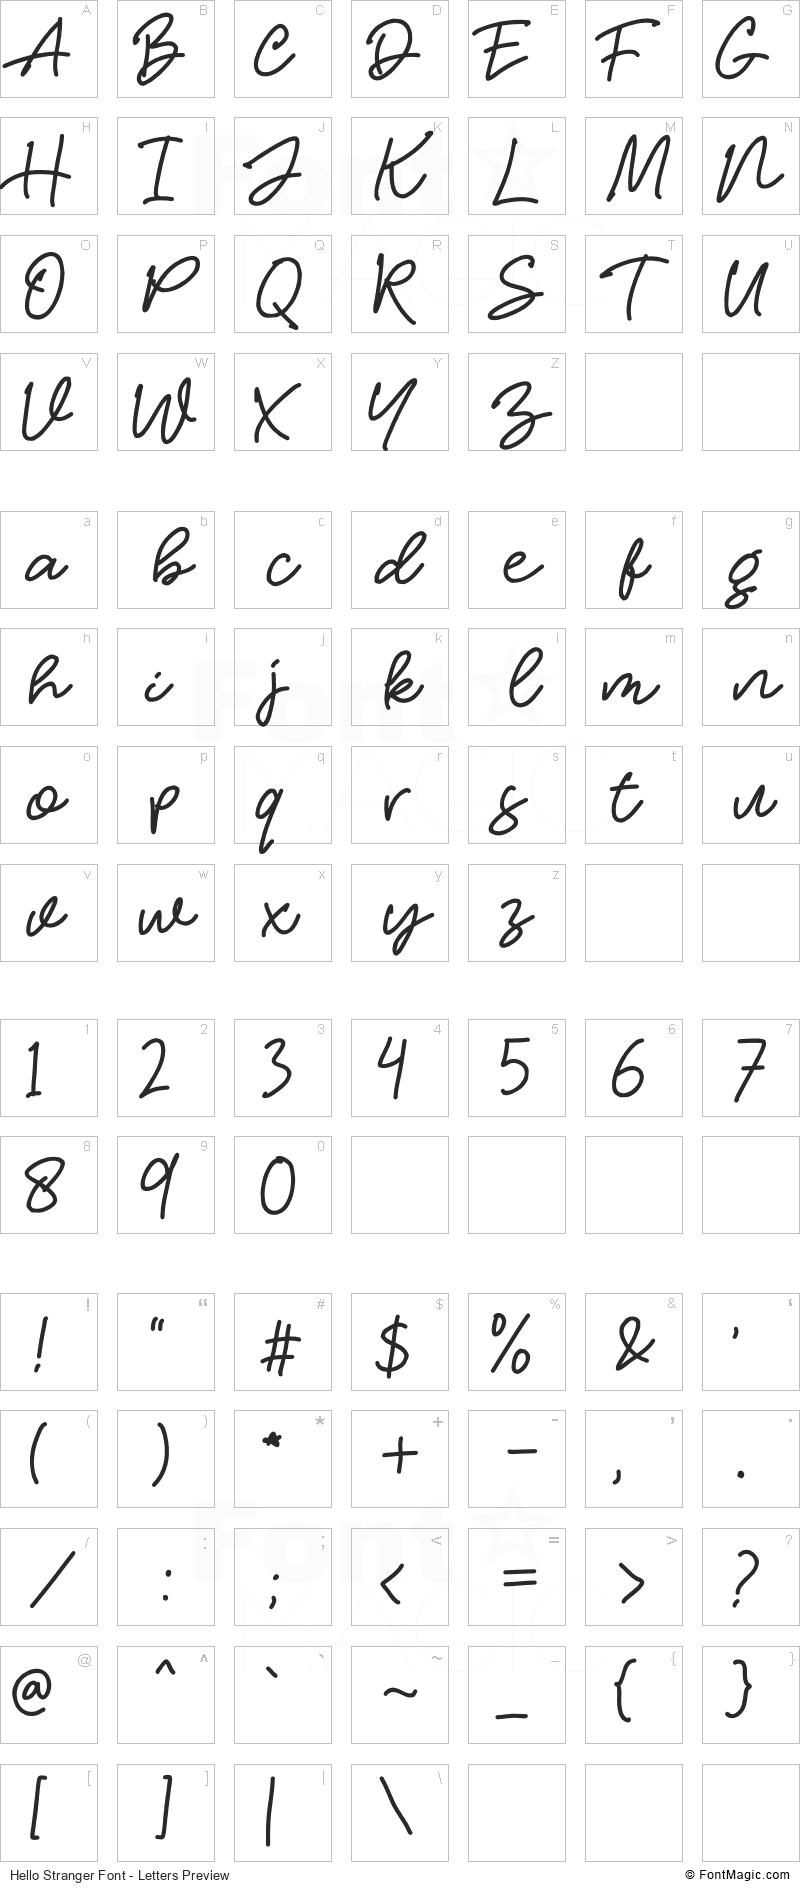 Hello Stranger Font - All Latters Preview Chart